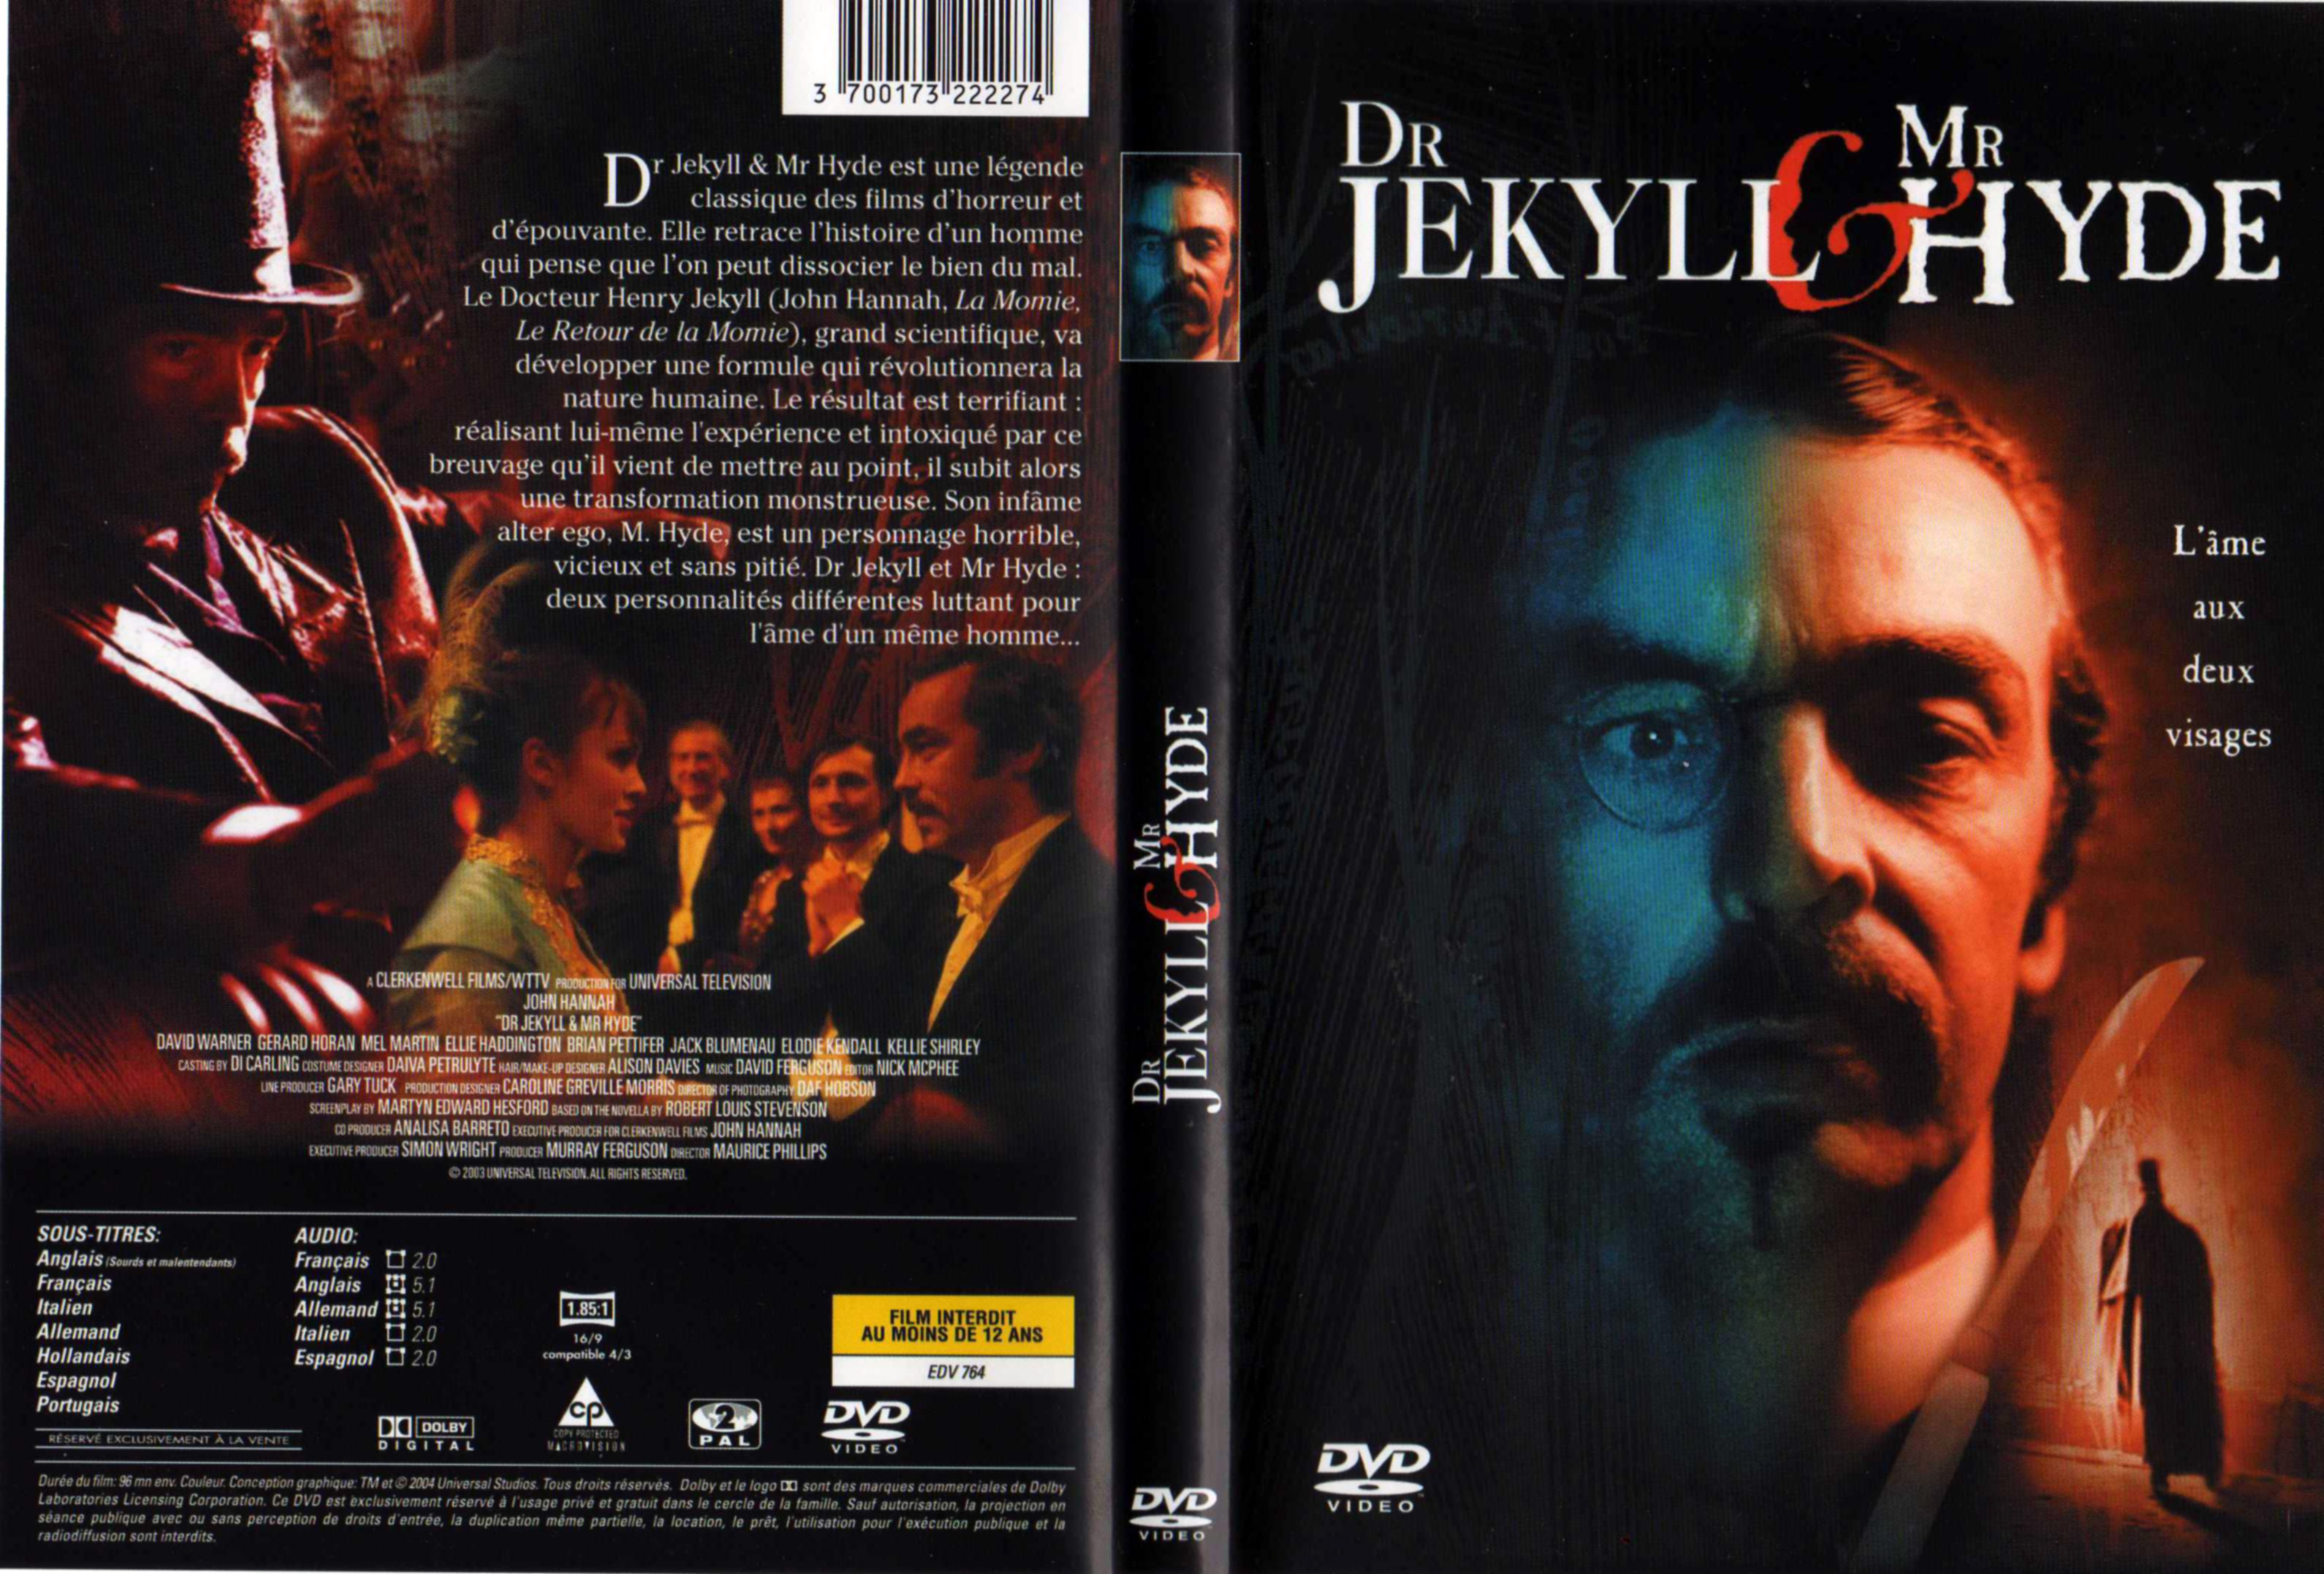 Jaquette DVD Dr Jekyll and Mr Hyde (2003)